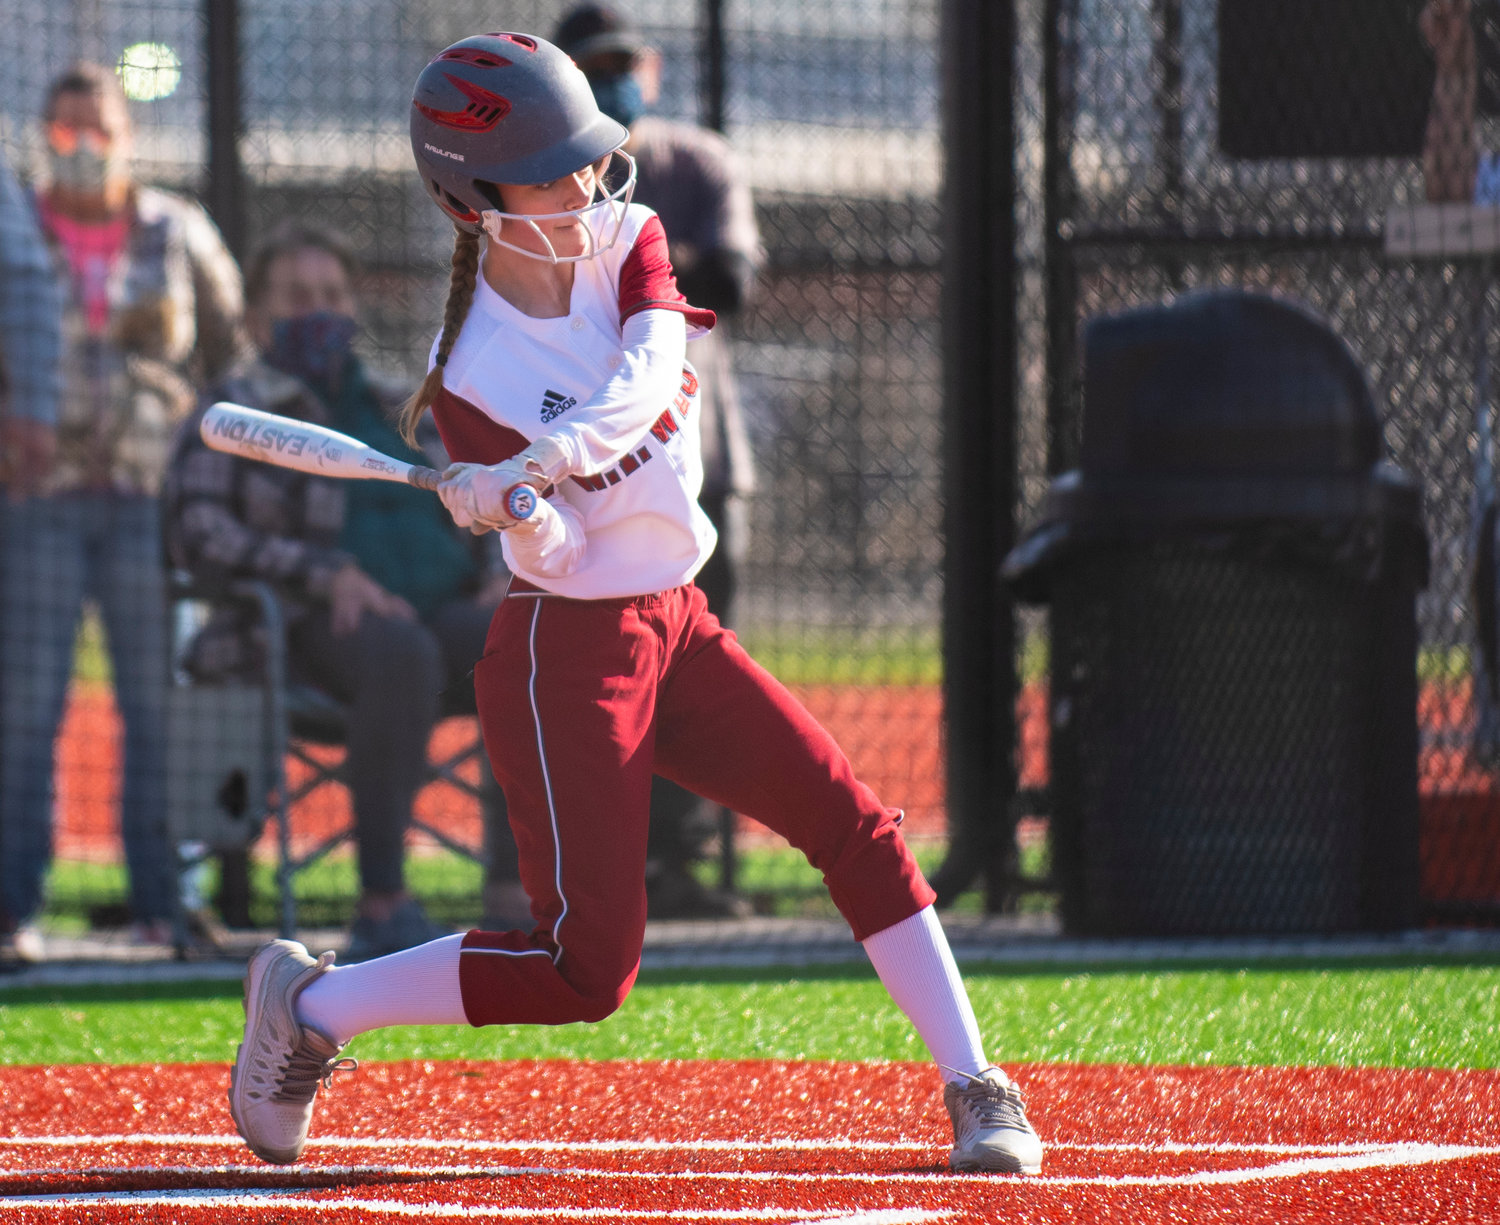 W.F. West sophomore Brielle Etter loads up for a Rochester pitch on Wednesday.